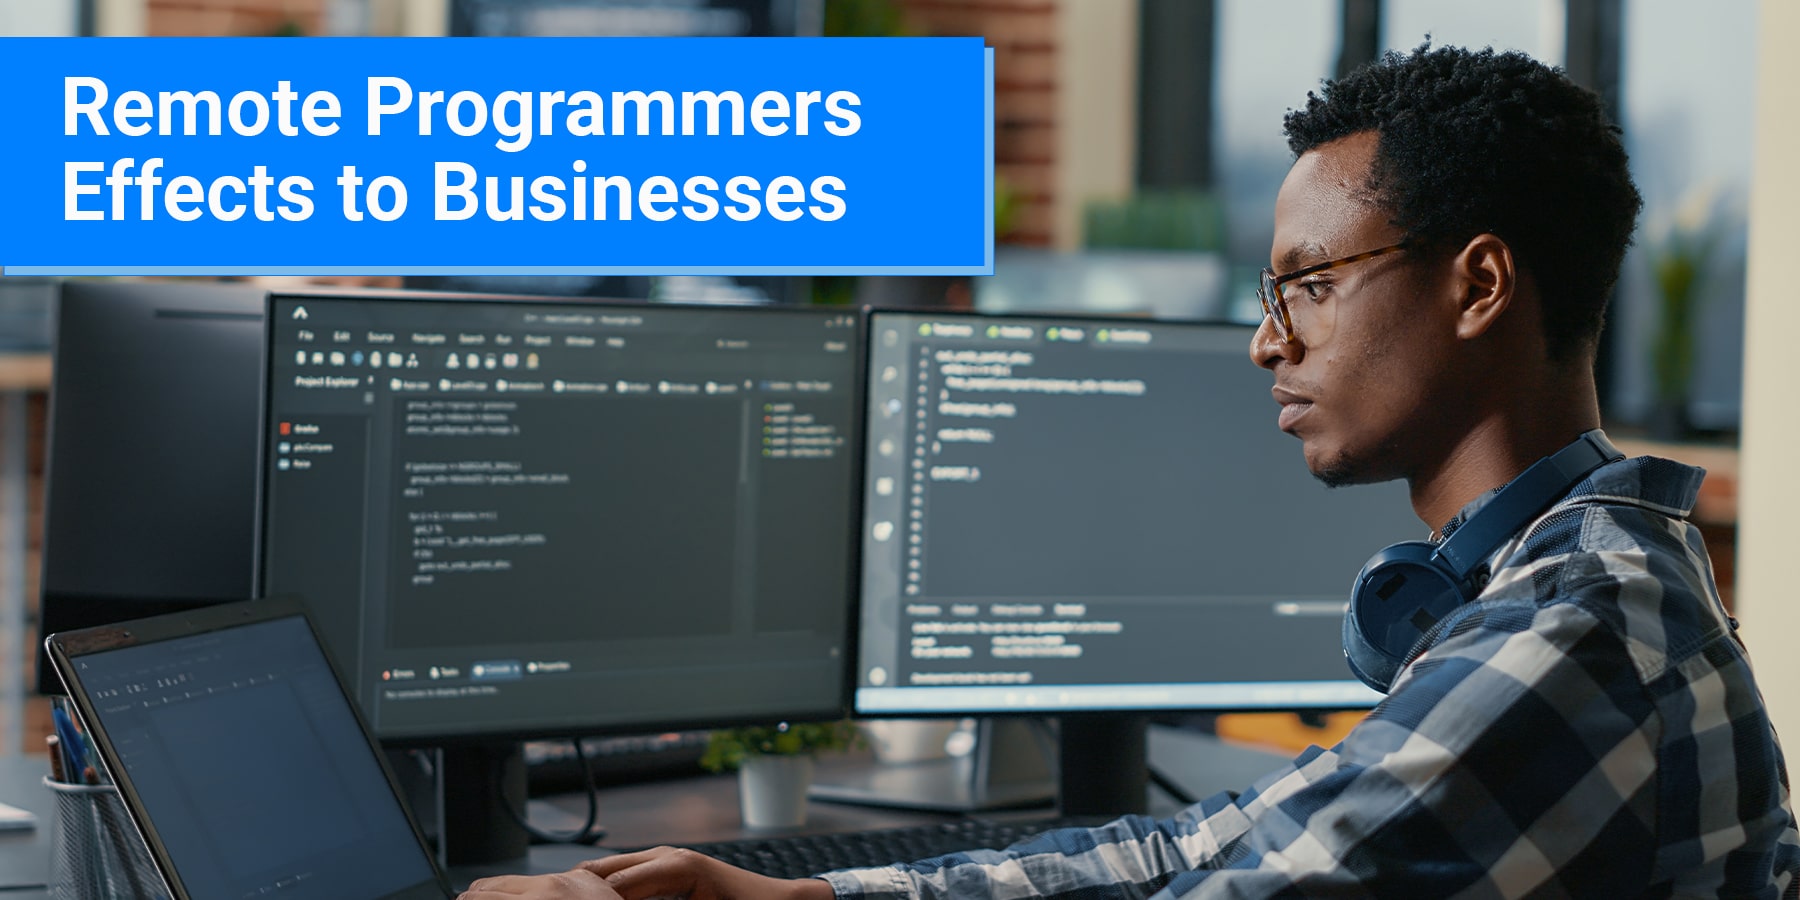 Remote Programmers – How and Why They Are Changing the Way We Do Business